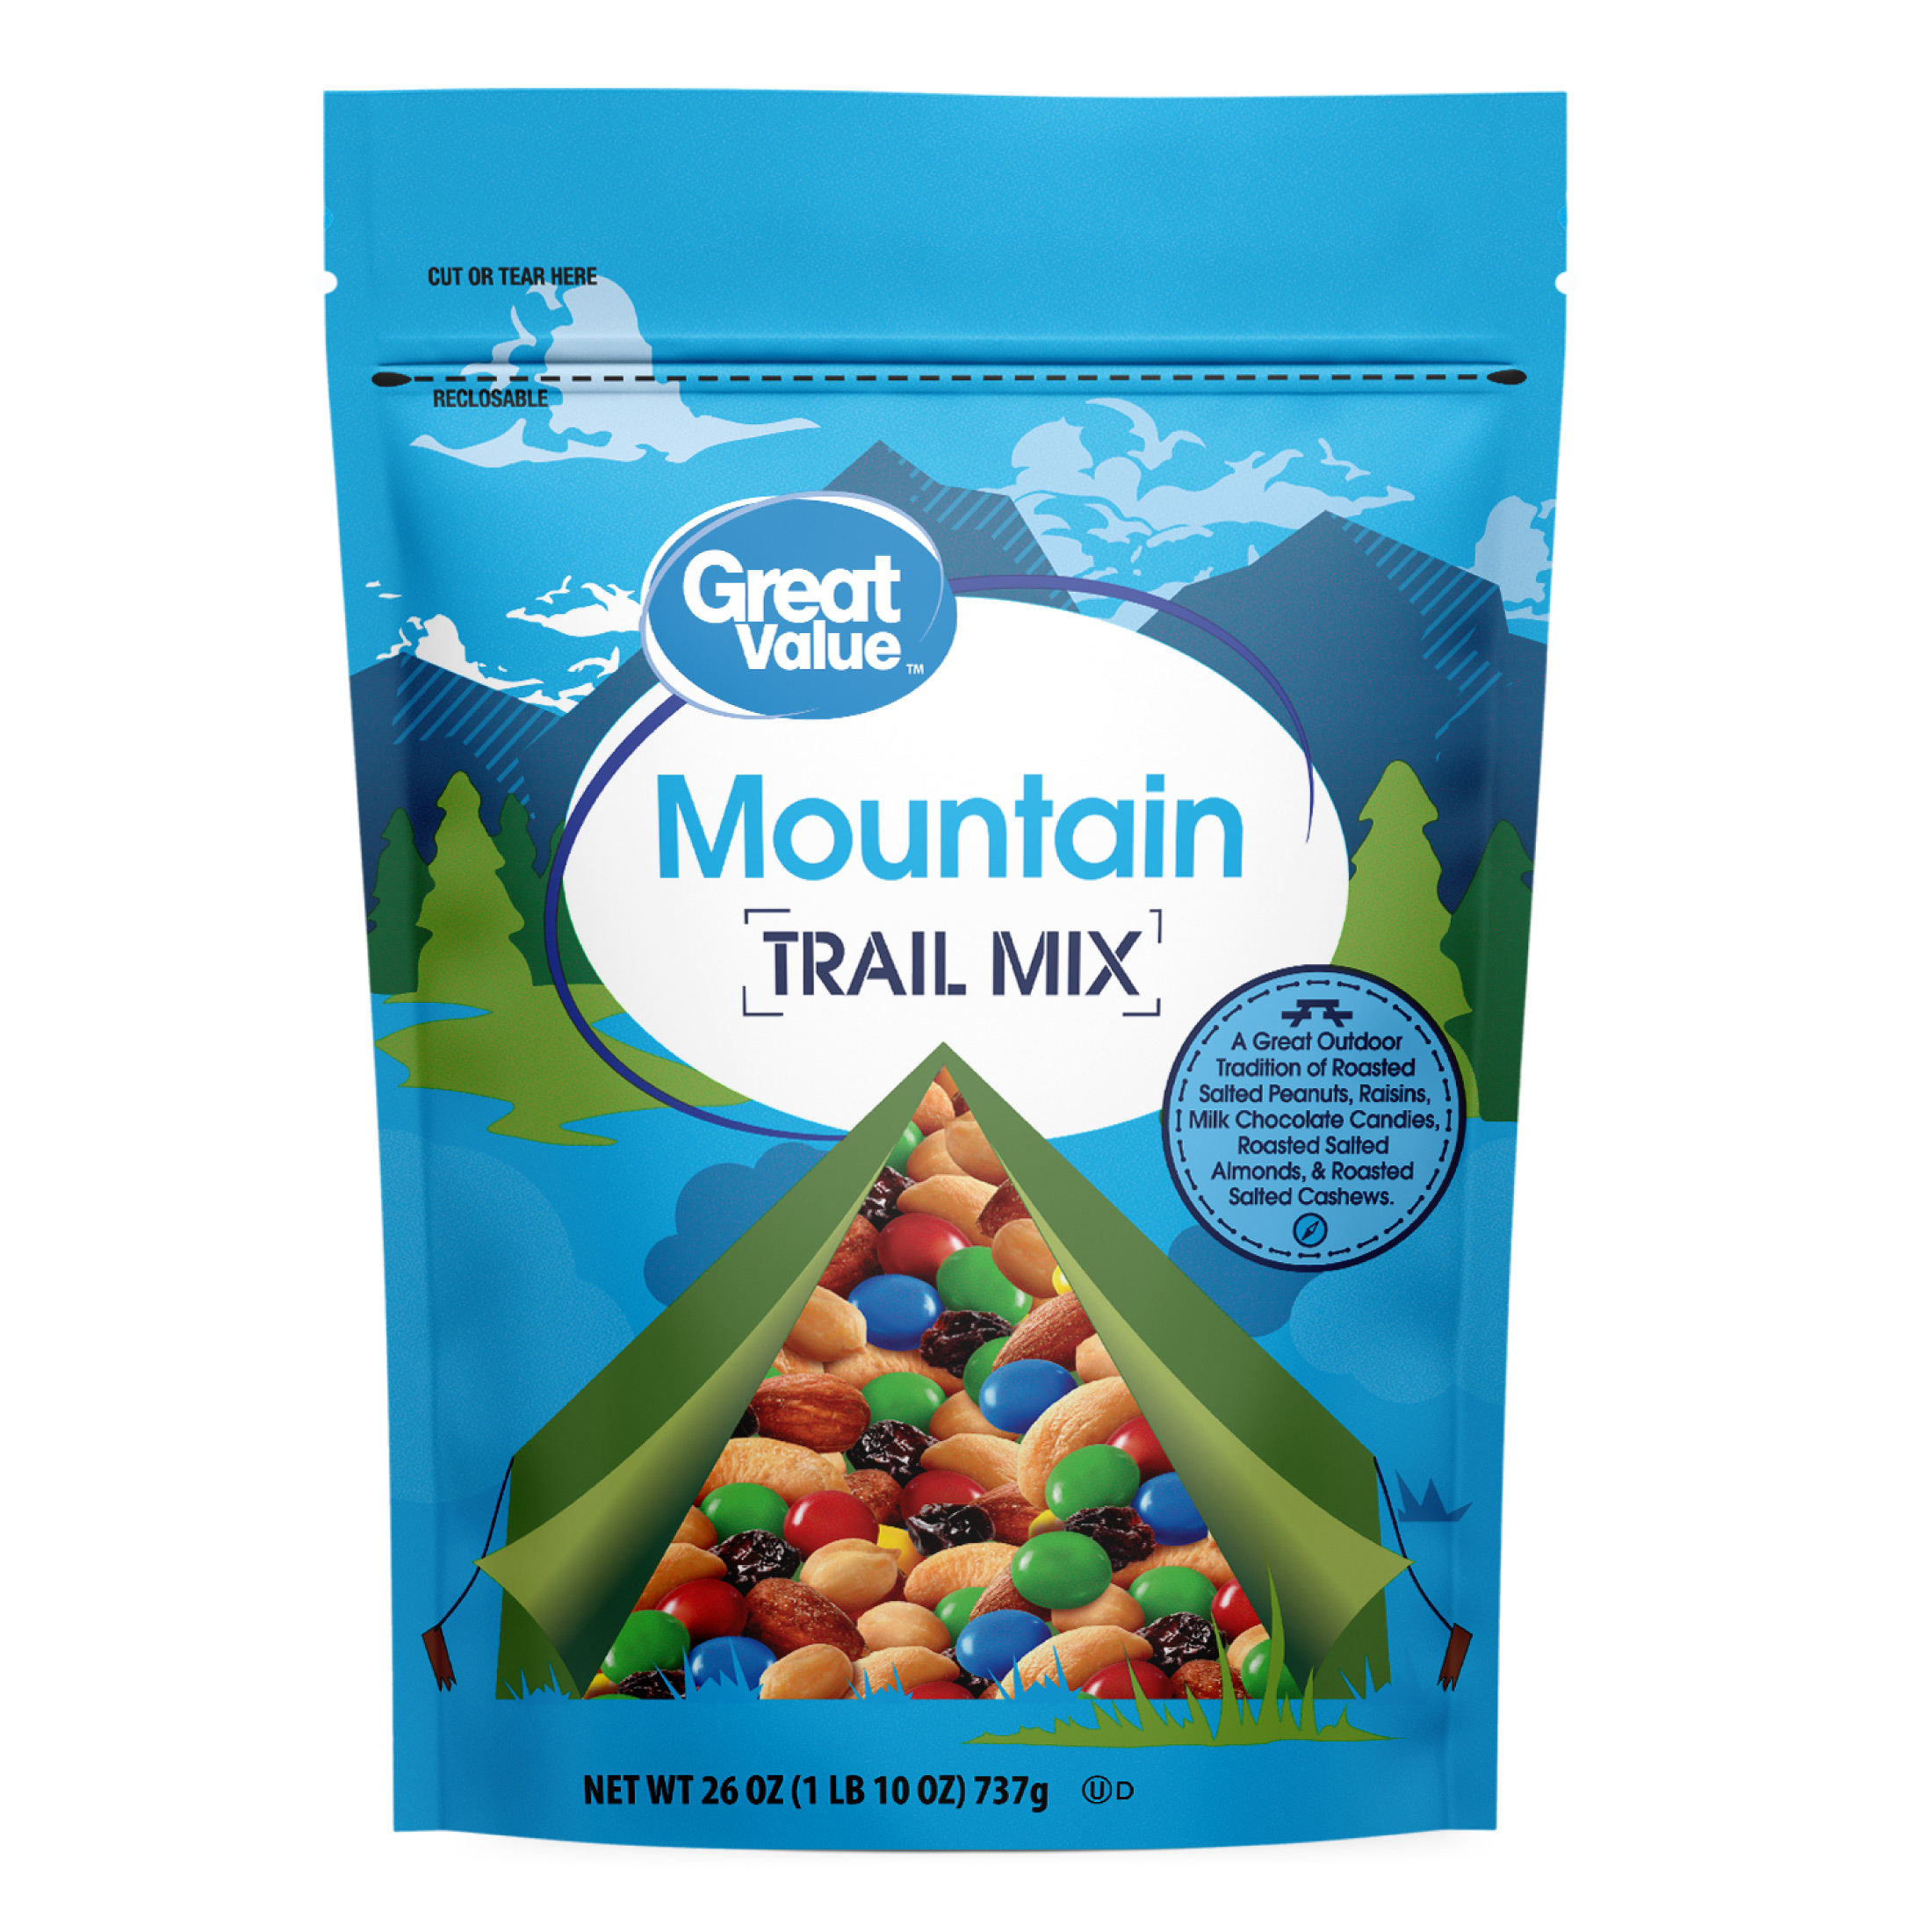 Great Value Mountain Trail Mix, 26 oz - image 1 of 6